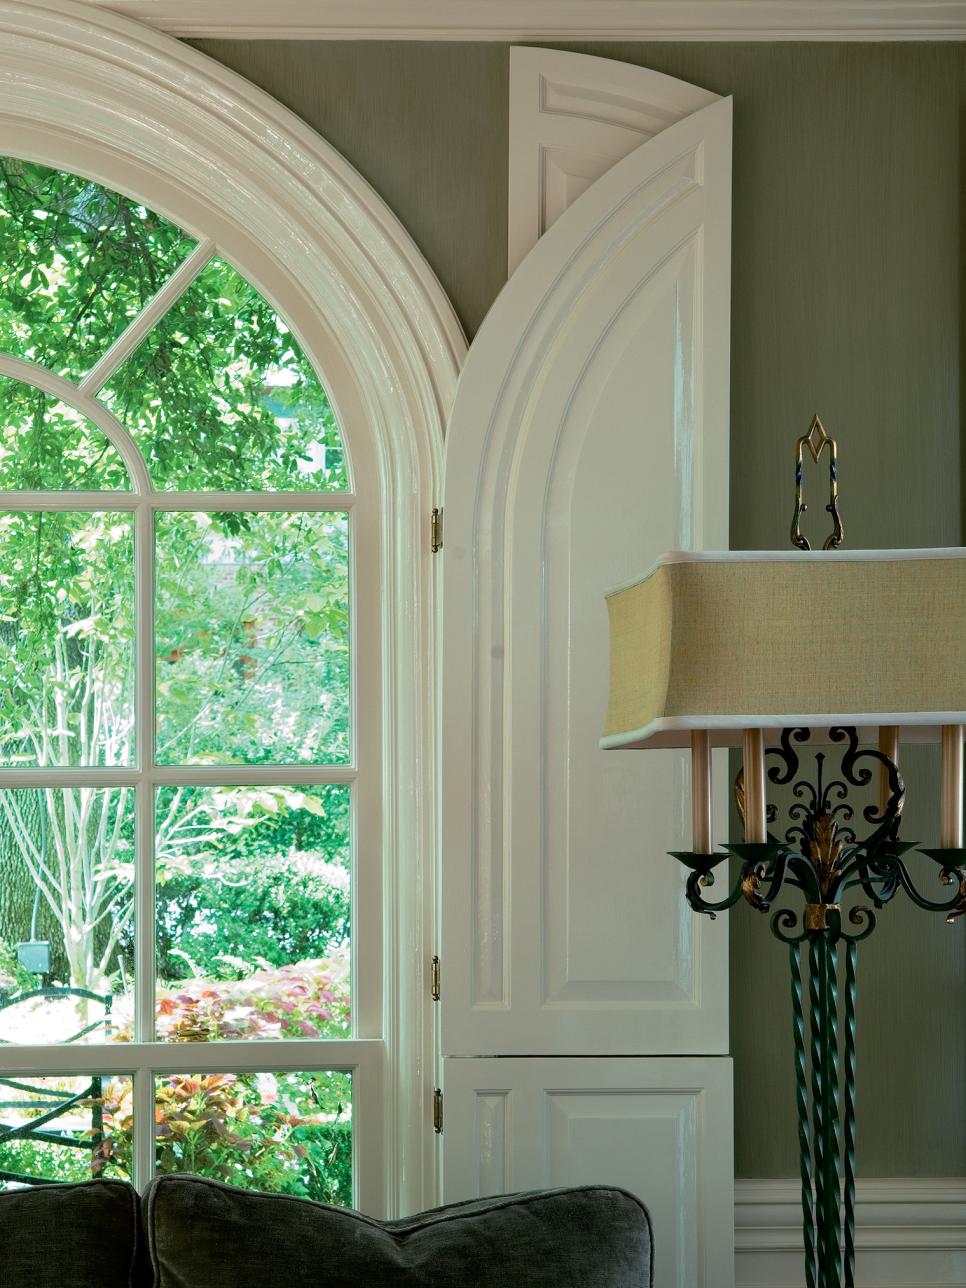 Arched Windows with Green Walls Overlooking a Garden